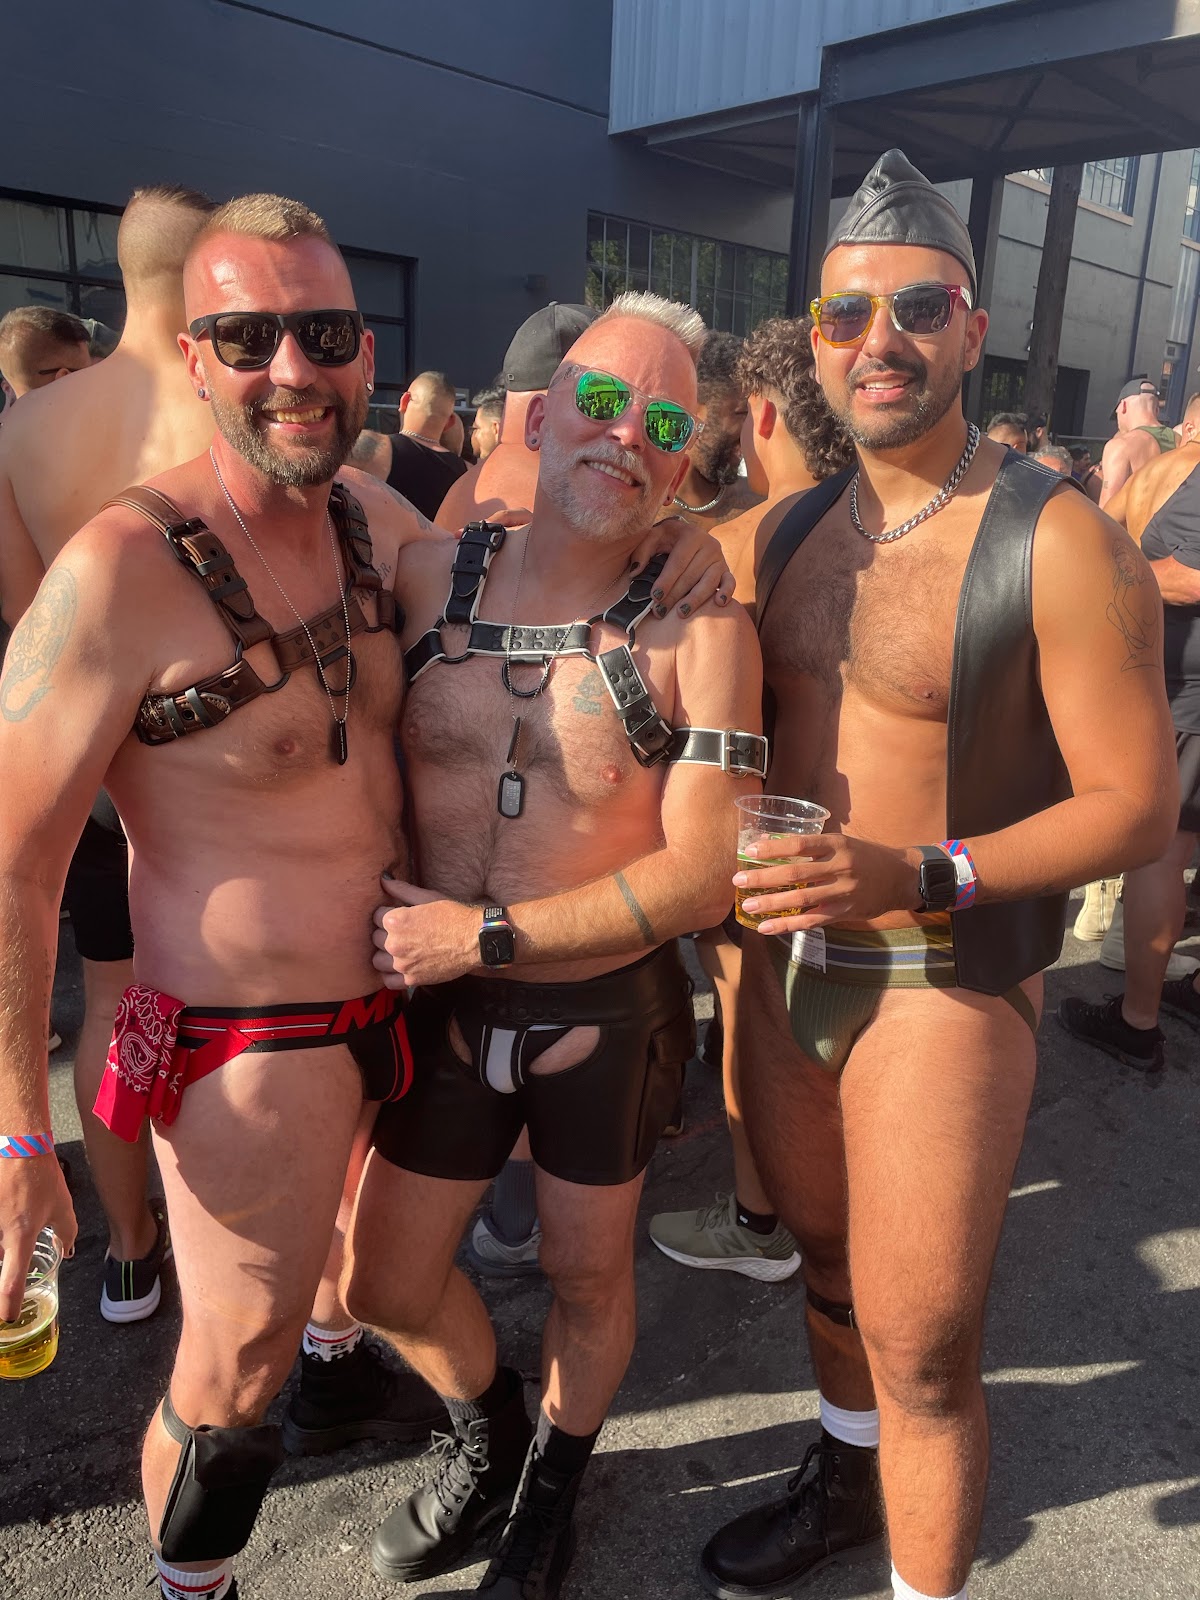 Three gay muscle daddies wearing jockstraps, leather harnesses and leather vests outside and drinking during Folsom street fair 2023 in San Francisco